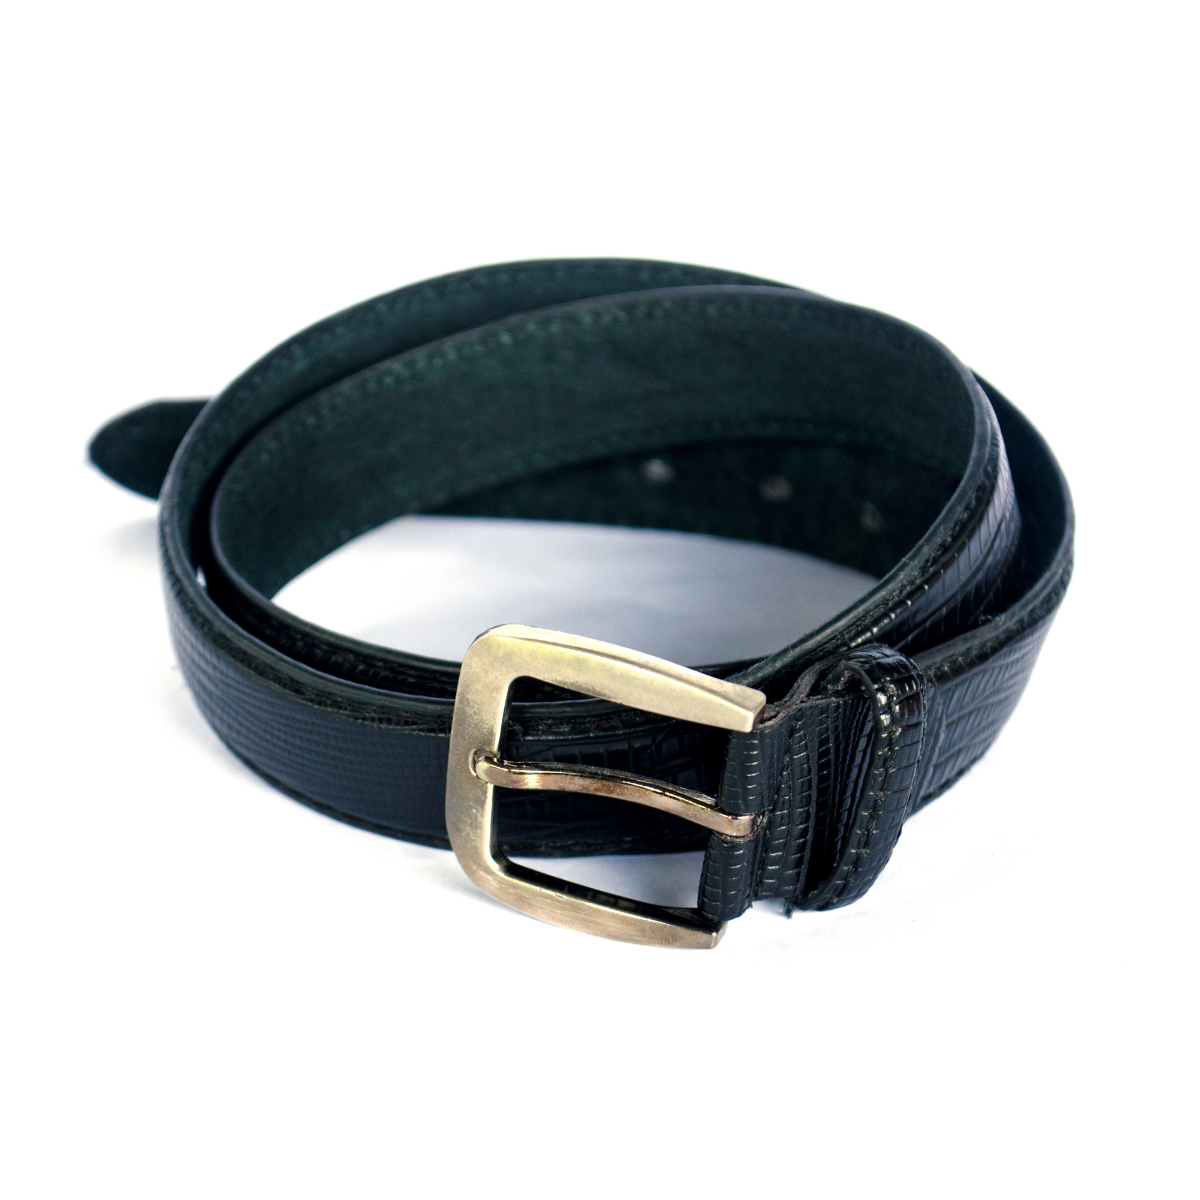 7. Timeless Elegance: Surprise Him with a Personalized Leather Belt for Your 3rd Anniversary